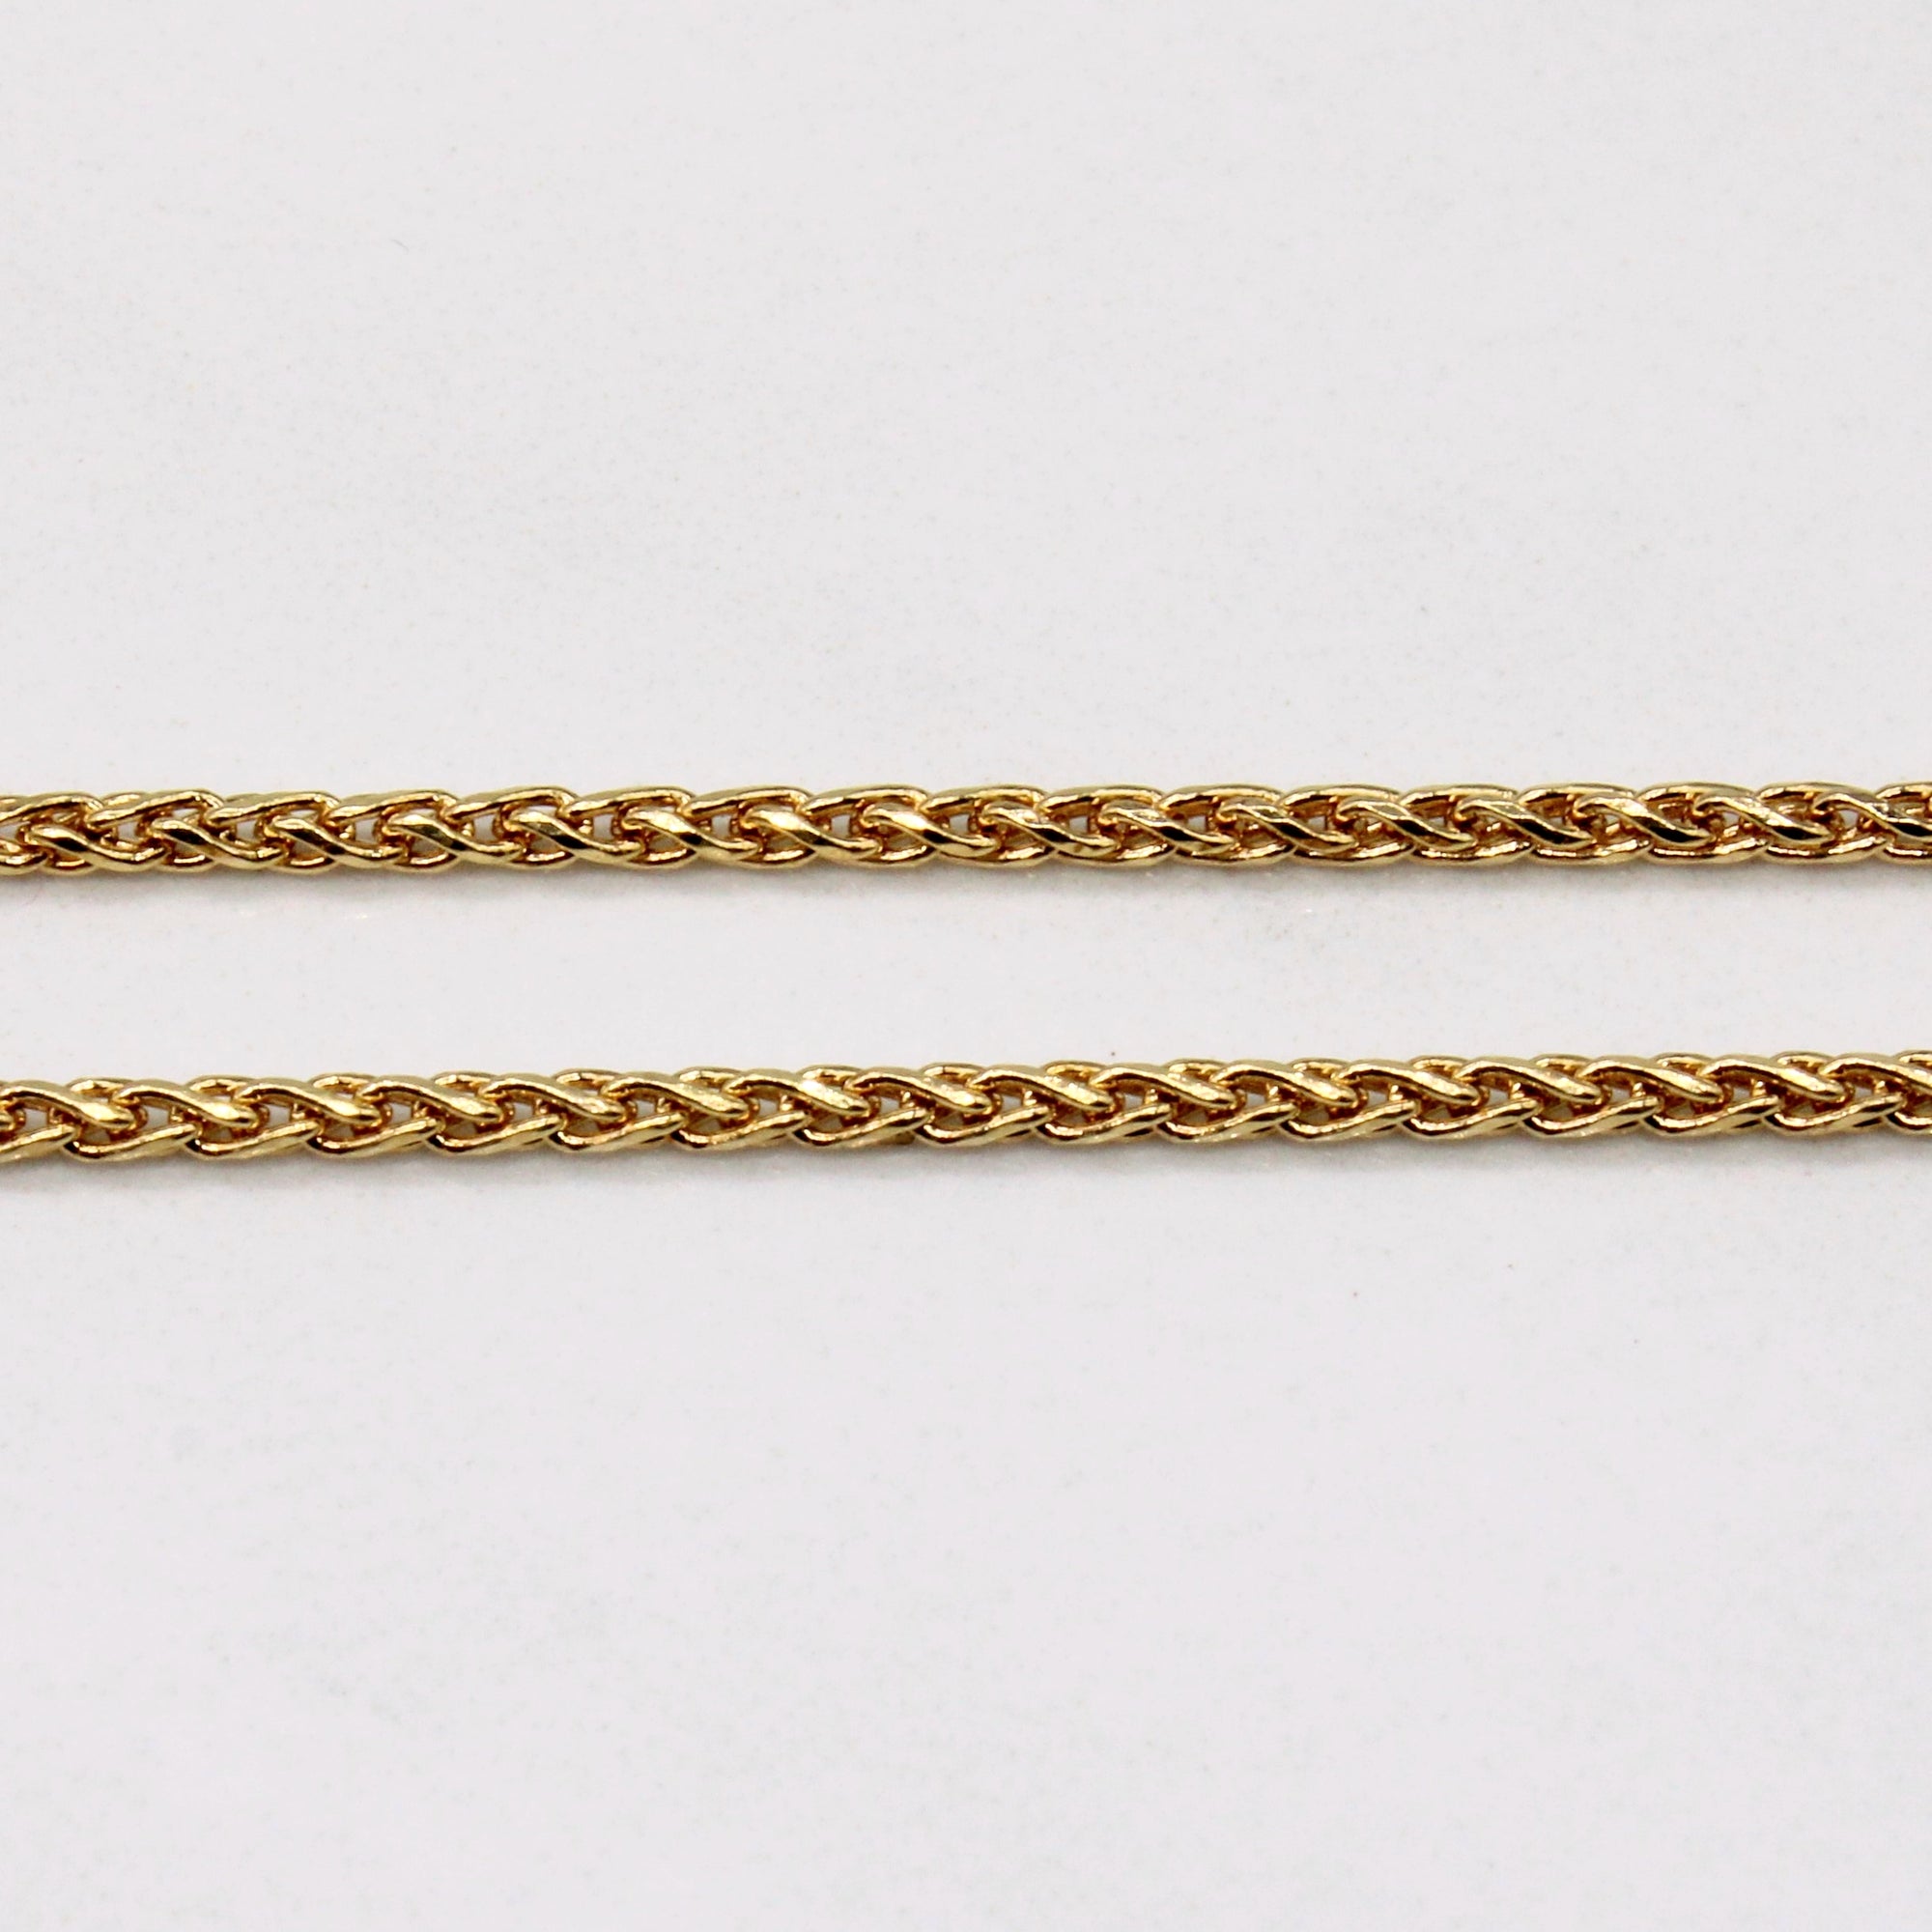 10k Yellow Gold Birdcage Link Chain | 20